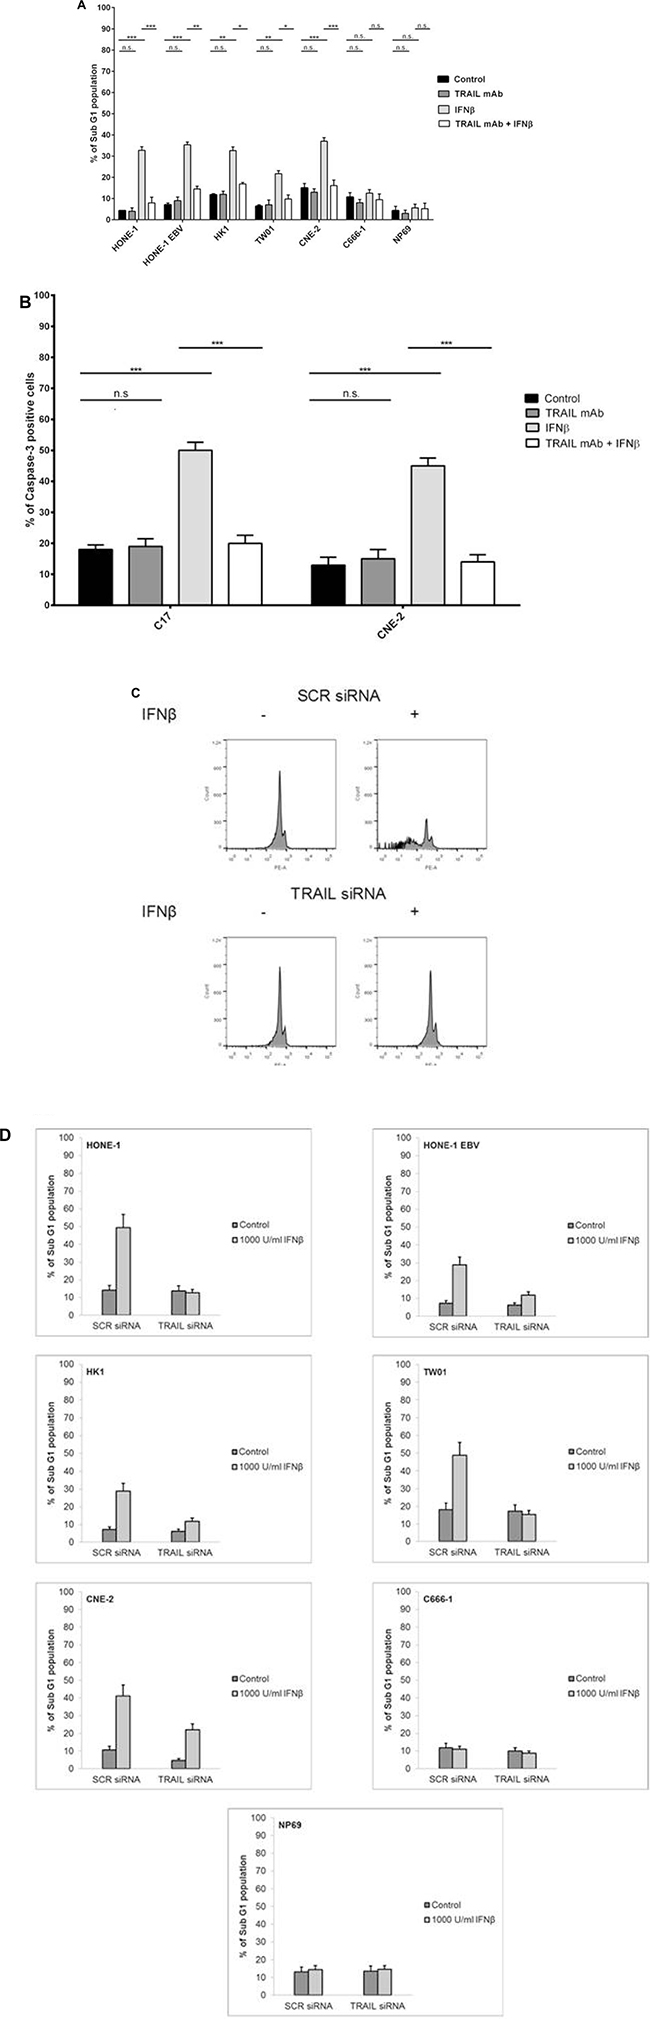 Inhibition of TRAIL inhibits IFN&#x03B2;-induced apoptosis in NPC cells.